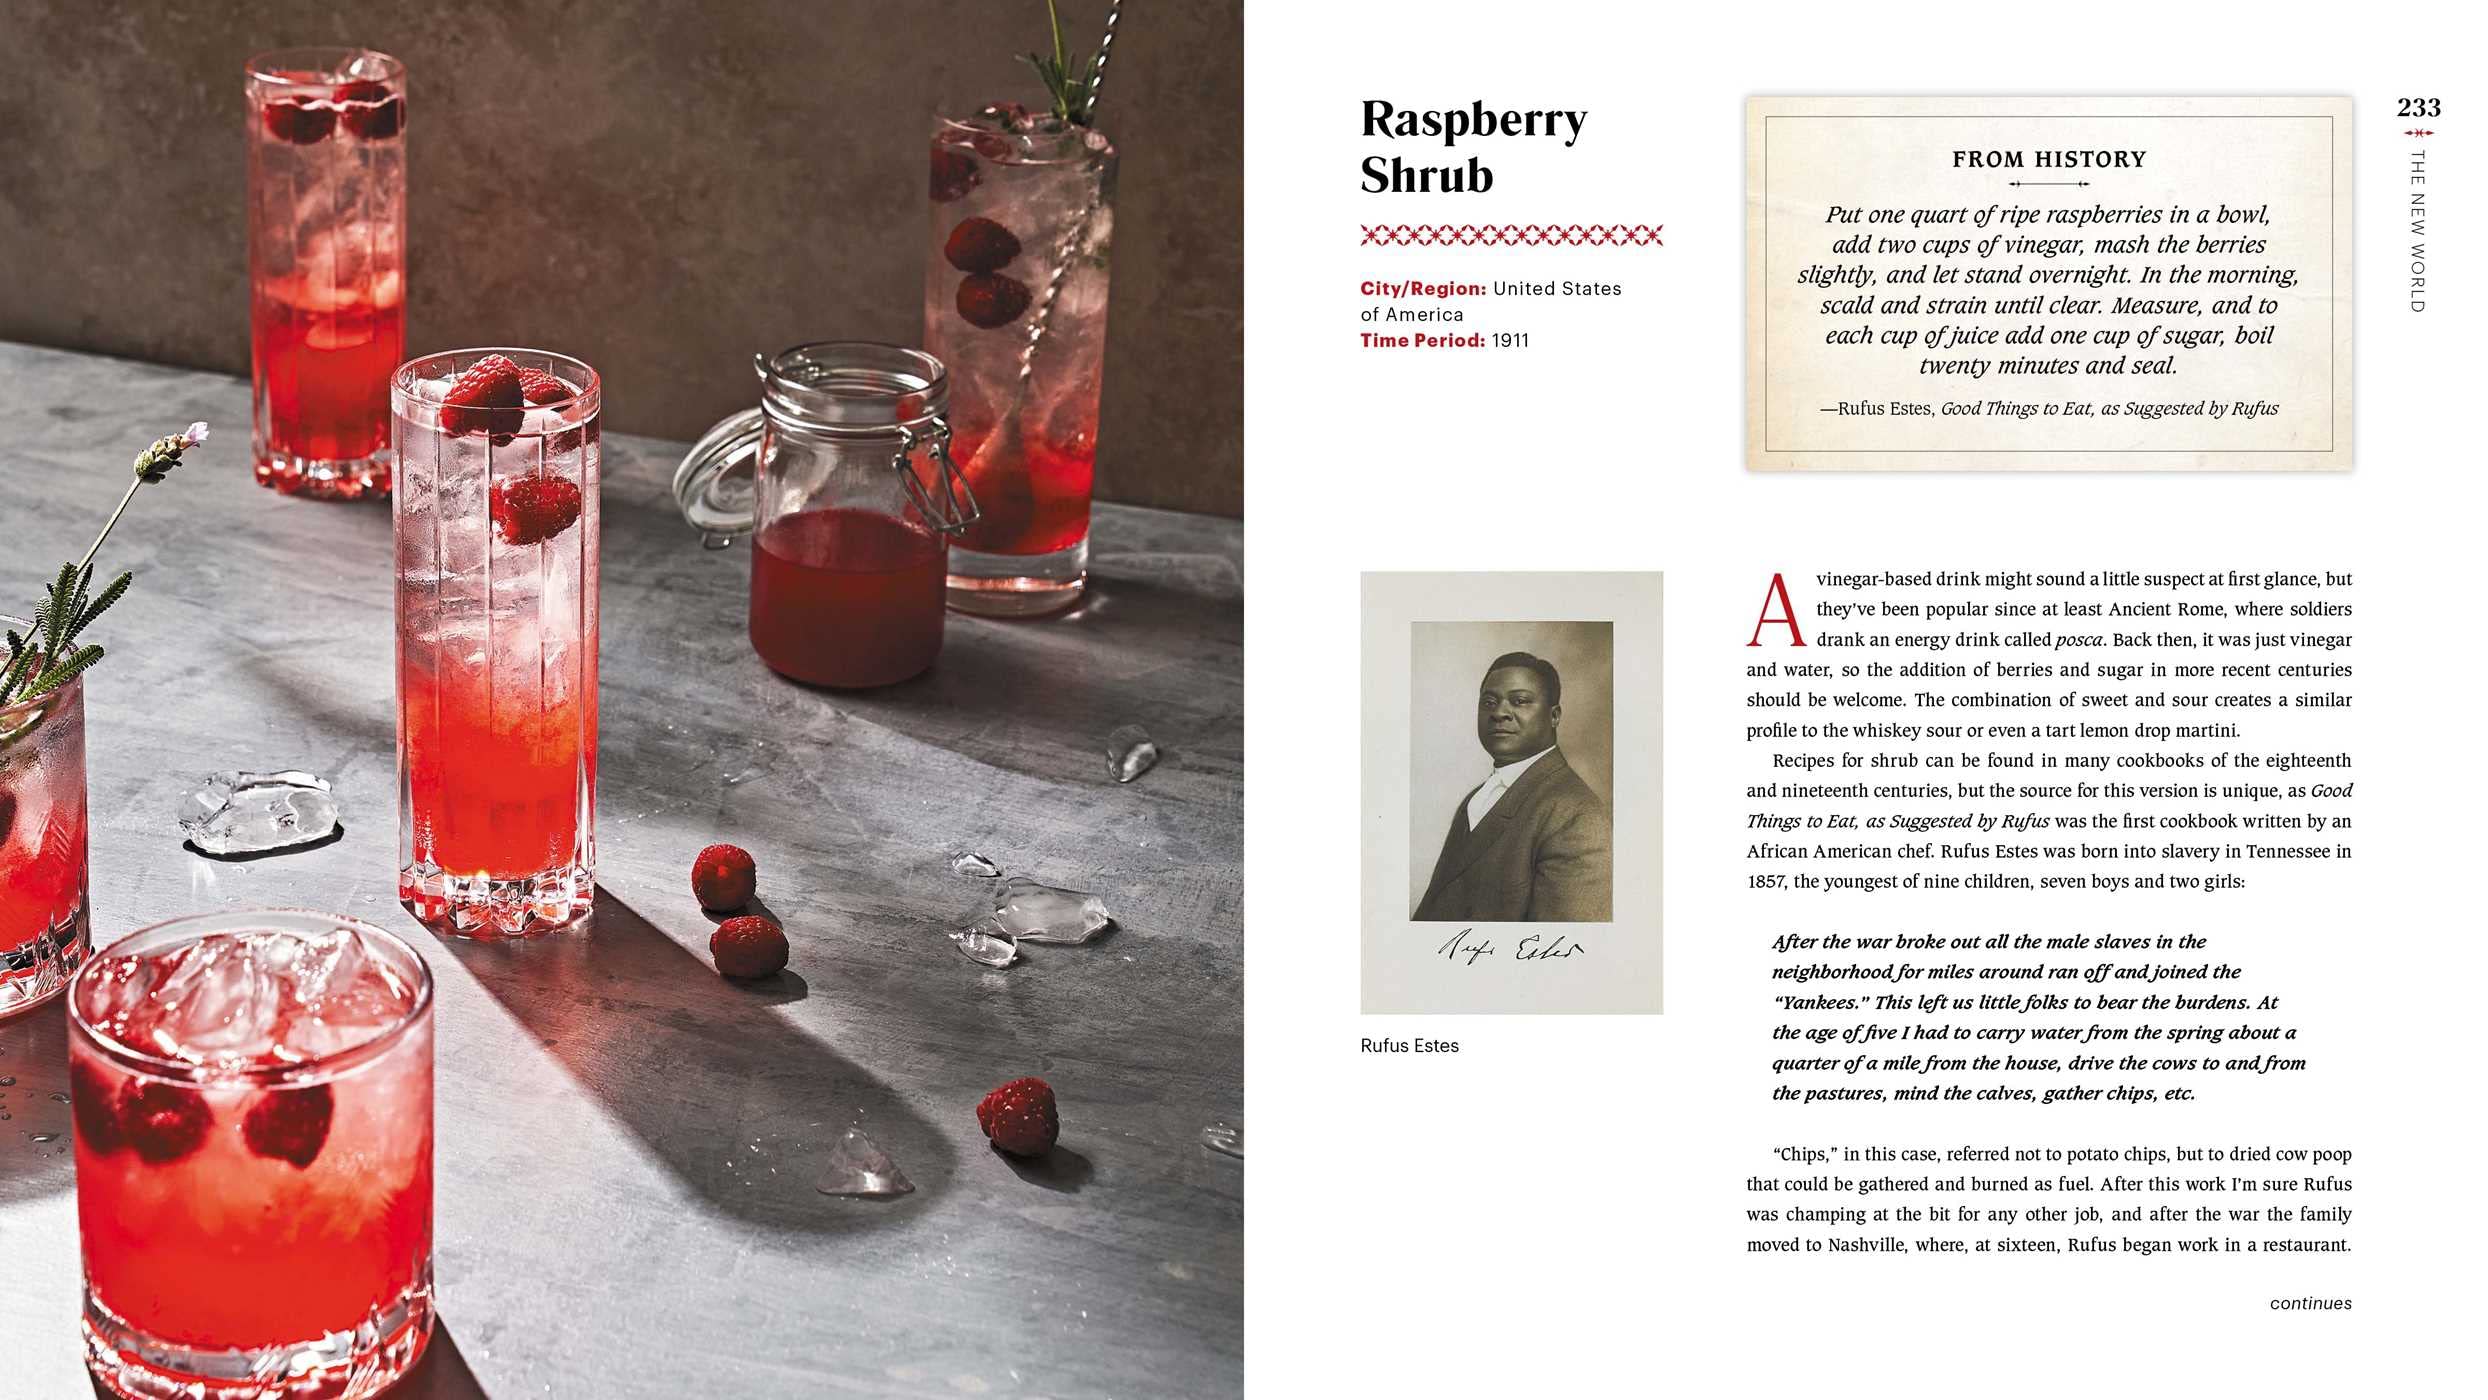 Tasting History: Explore the Past through 4,000 Years of Recipes (Max Miller, Ann Volkwein)